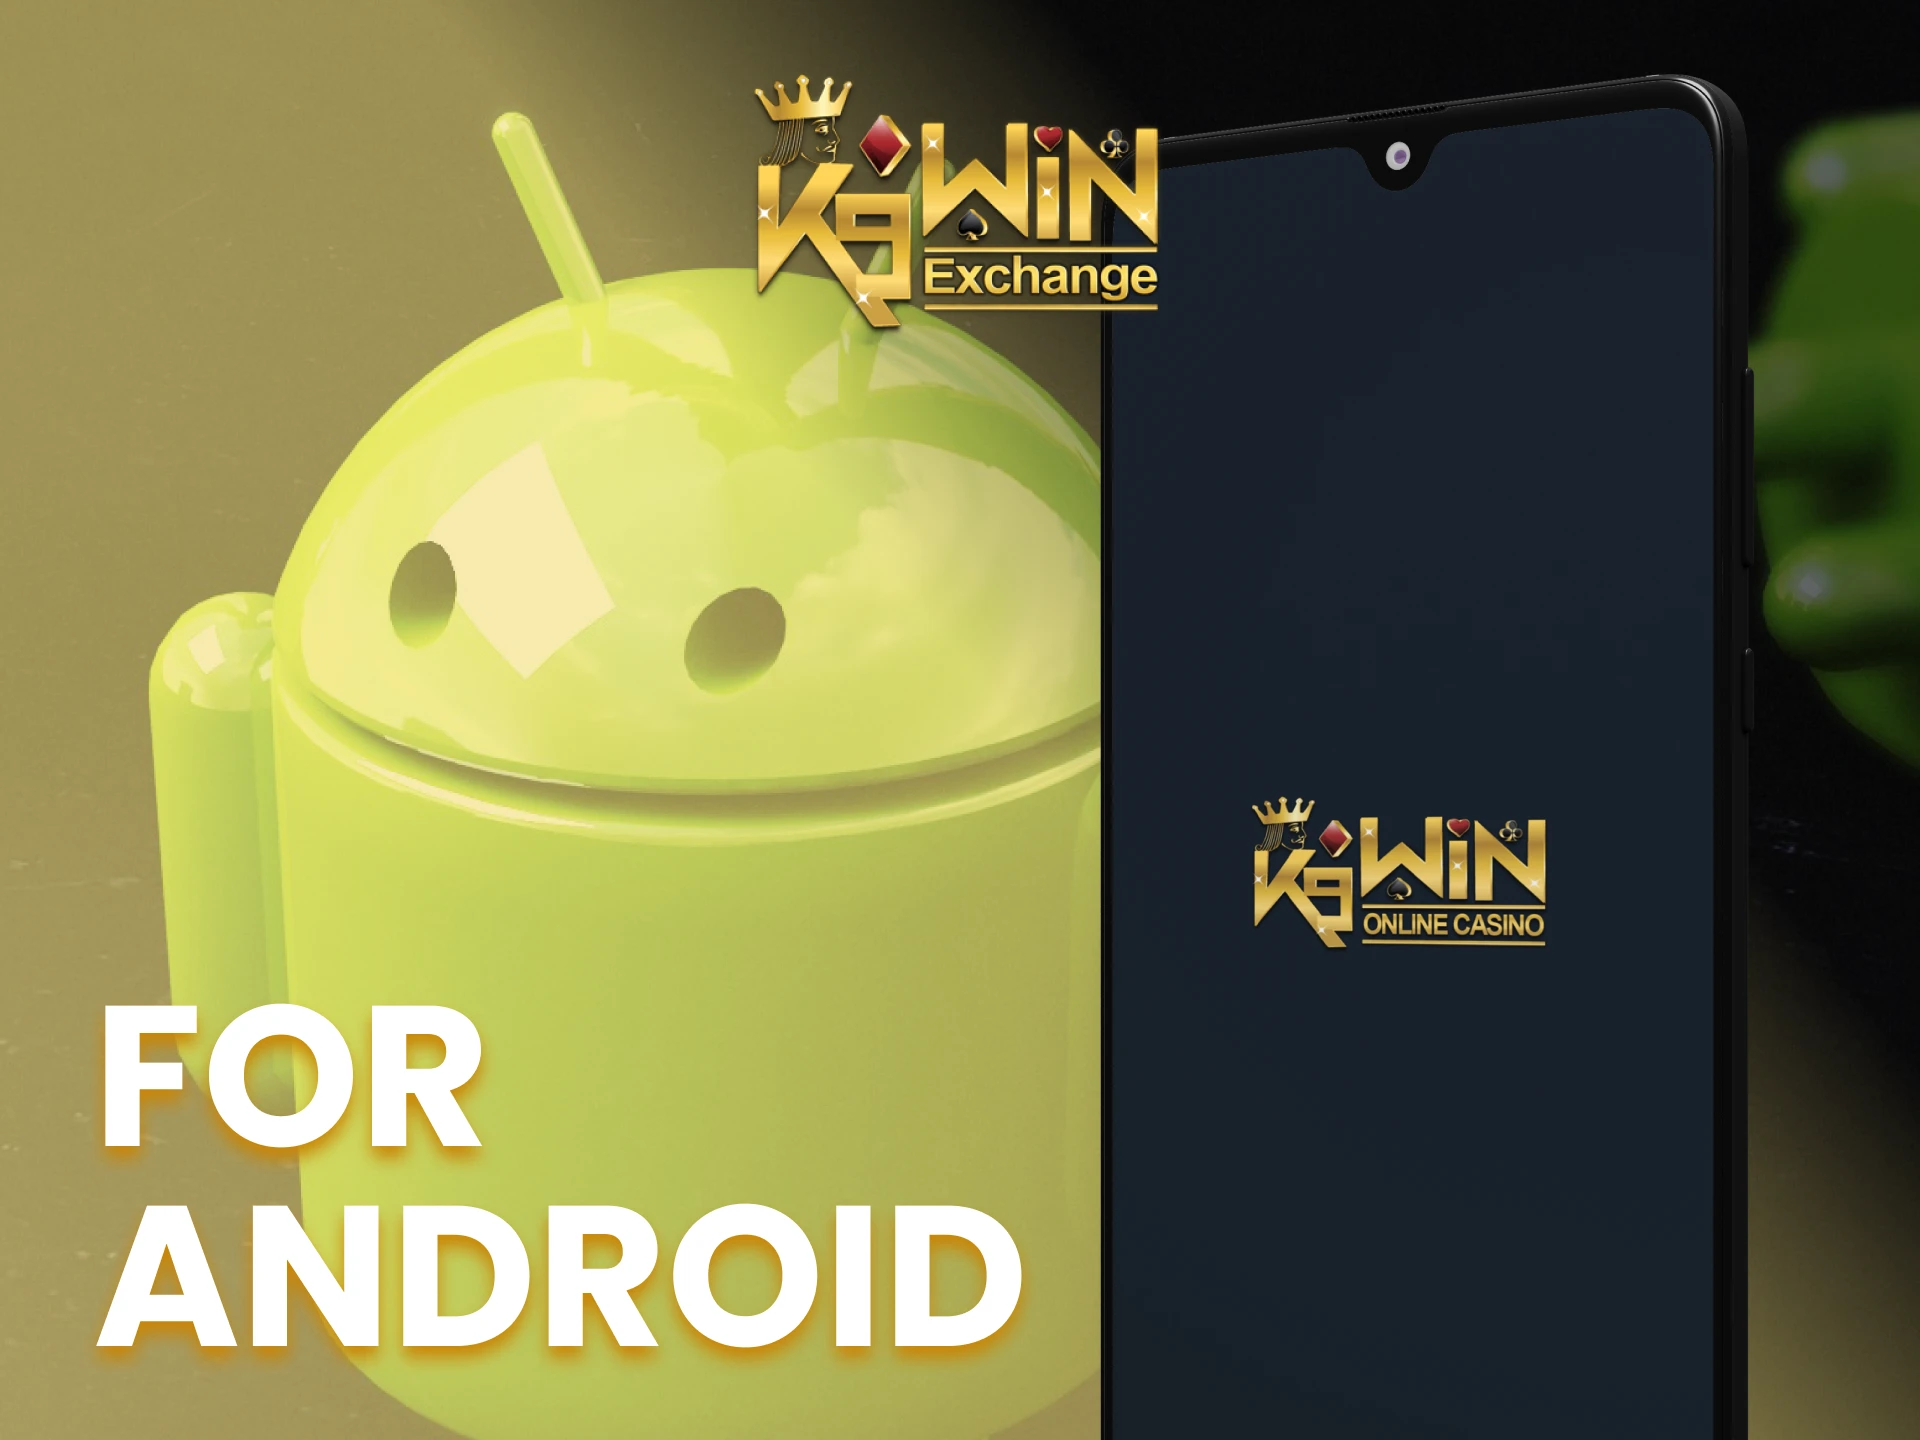 Install the K9Win Android app on your Android device.